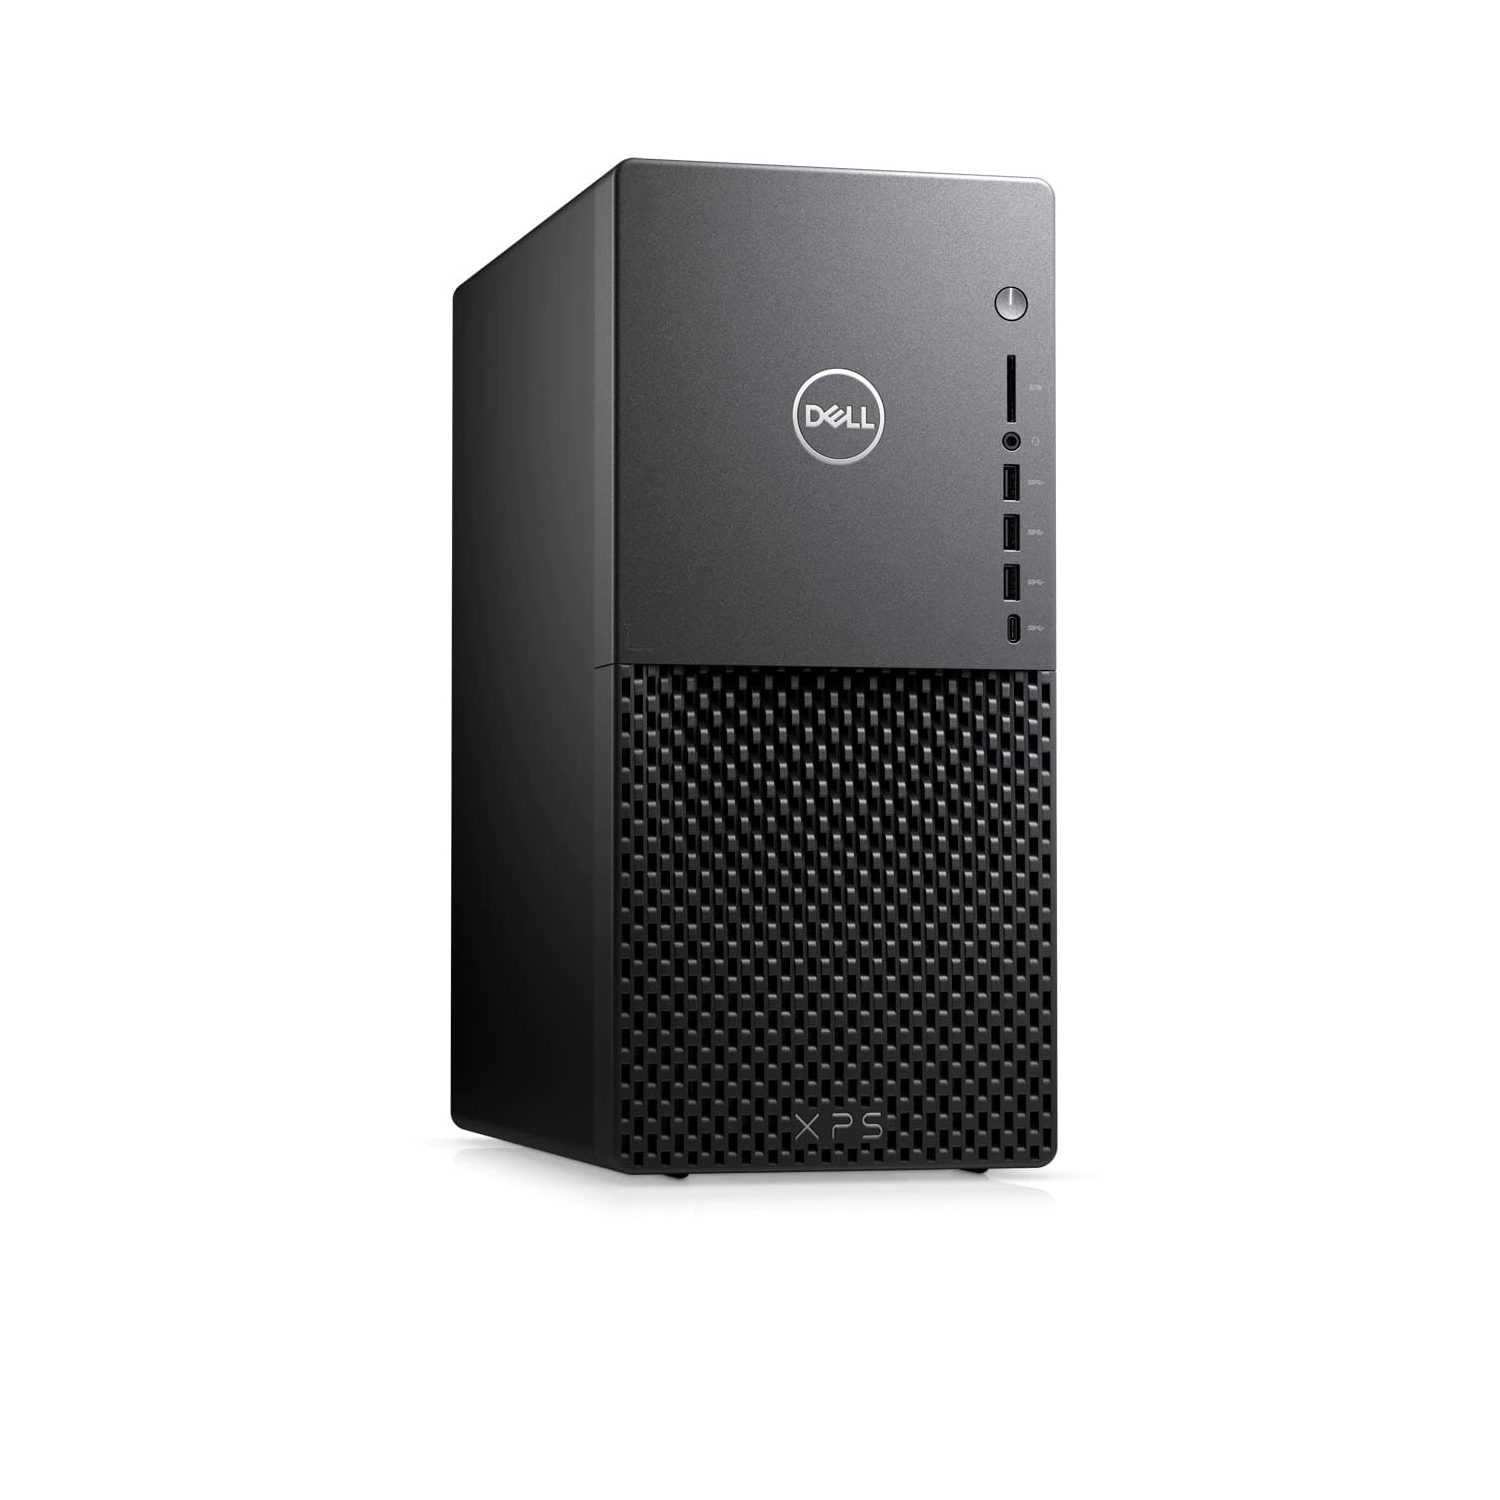 Refurbished (Excellent) - Dell XPS 8940 Desktop (2020) | Core i5 - 1TB HDD + 256GB SSD - 16GB RAM - RTX 3070 | 6 Cores @ 4.3 GHz - 10th Gen CPU Certified Refurbished